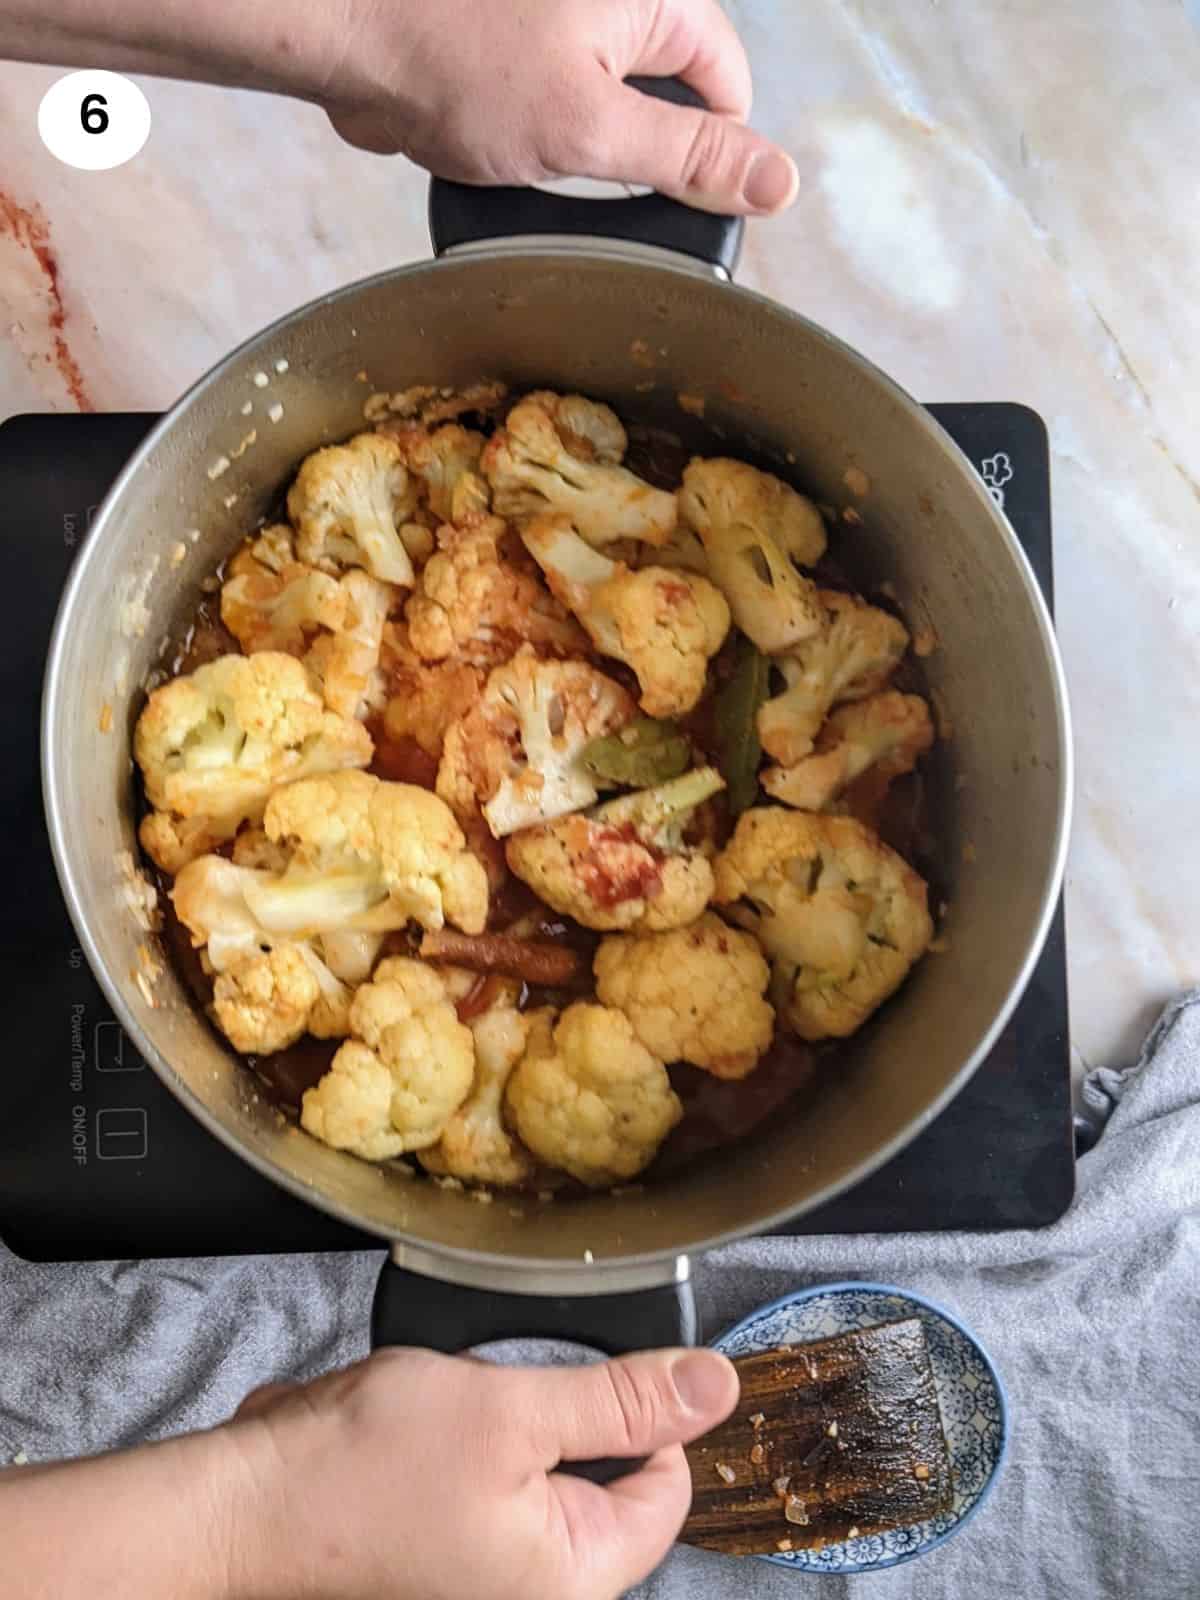 Stirring the braised cauliflower by holding the pot handles.